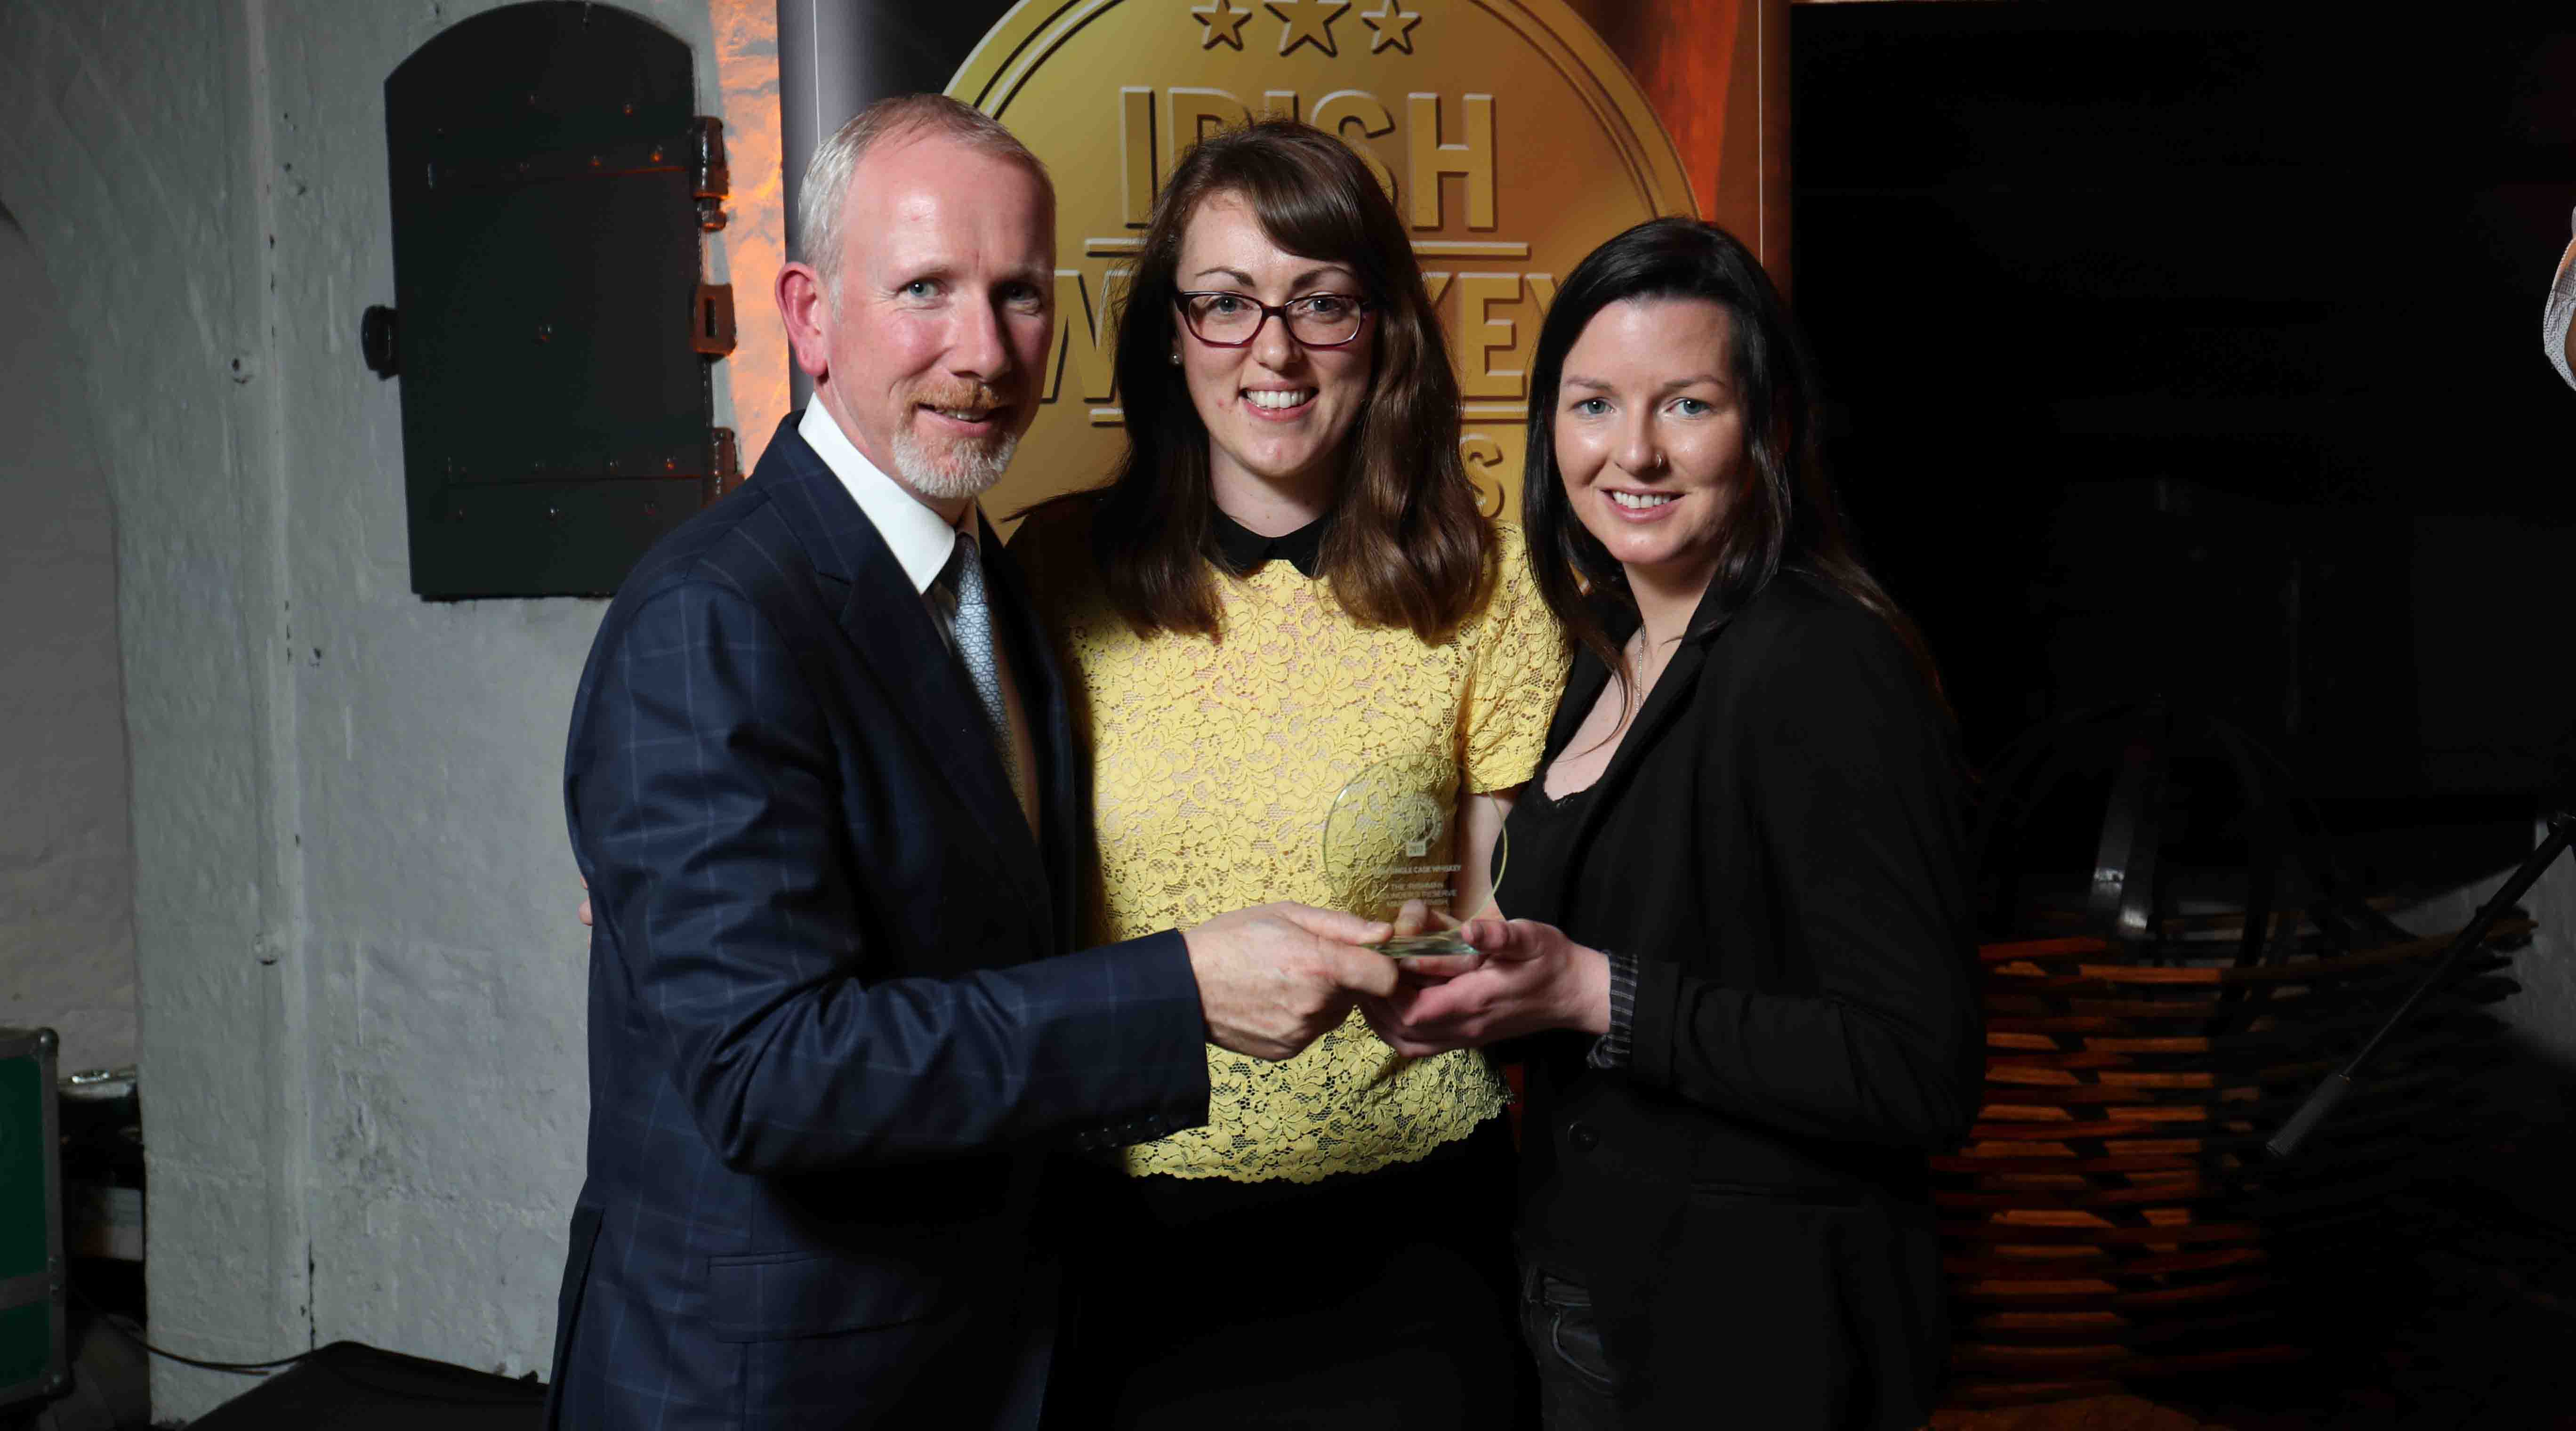 From left: Bernard Walsh (Walsh Distillery) and Sarah Finney (Irish Whiskey Society) with Clare Minnock of Walsh Distillery which was awarded a Gold Medal for The Irishman Founder's Reserve Marsala Finish in the Irish Single Cask category at the Irish Whiskey Awards 2017 which took place in Jameson Distillery Bow Street, Smithfield, recently.